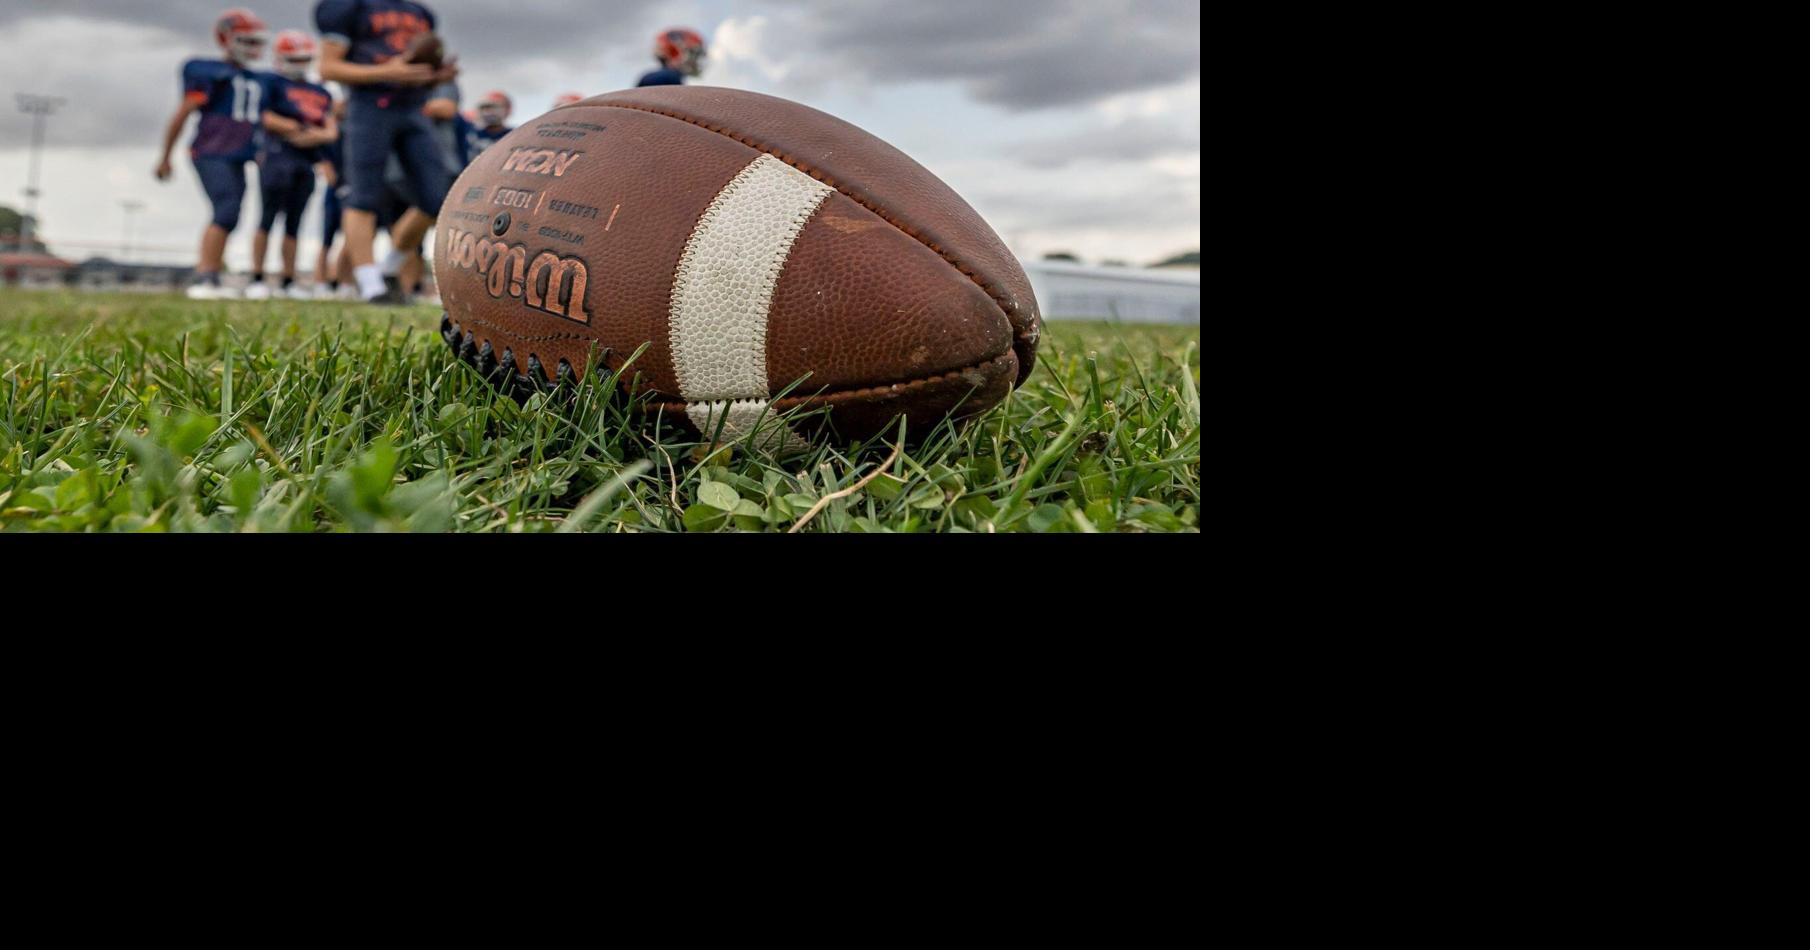 Live Week 2 score updates from throughout the Central Illinois area